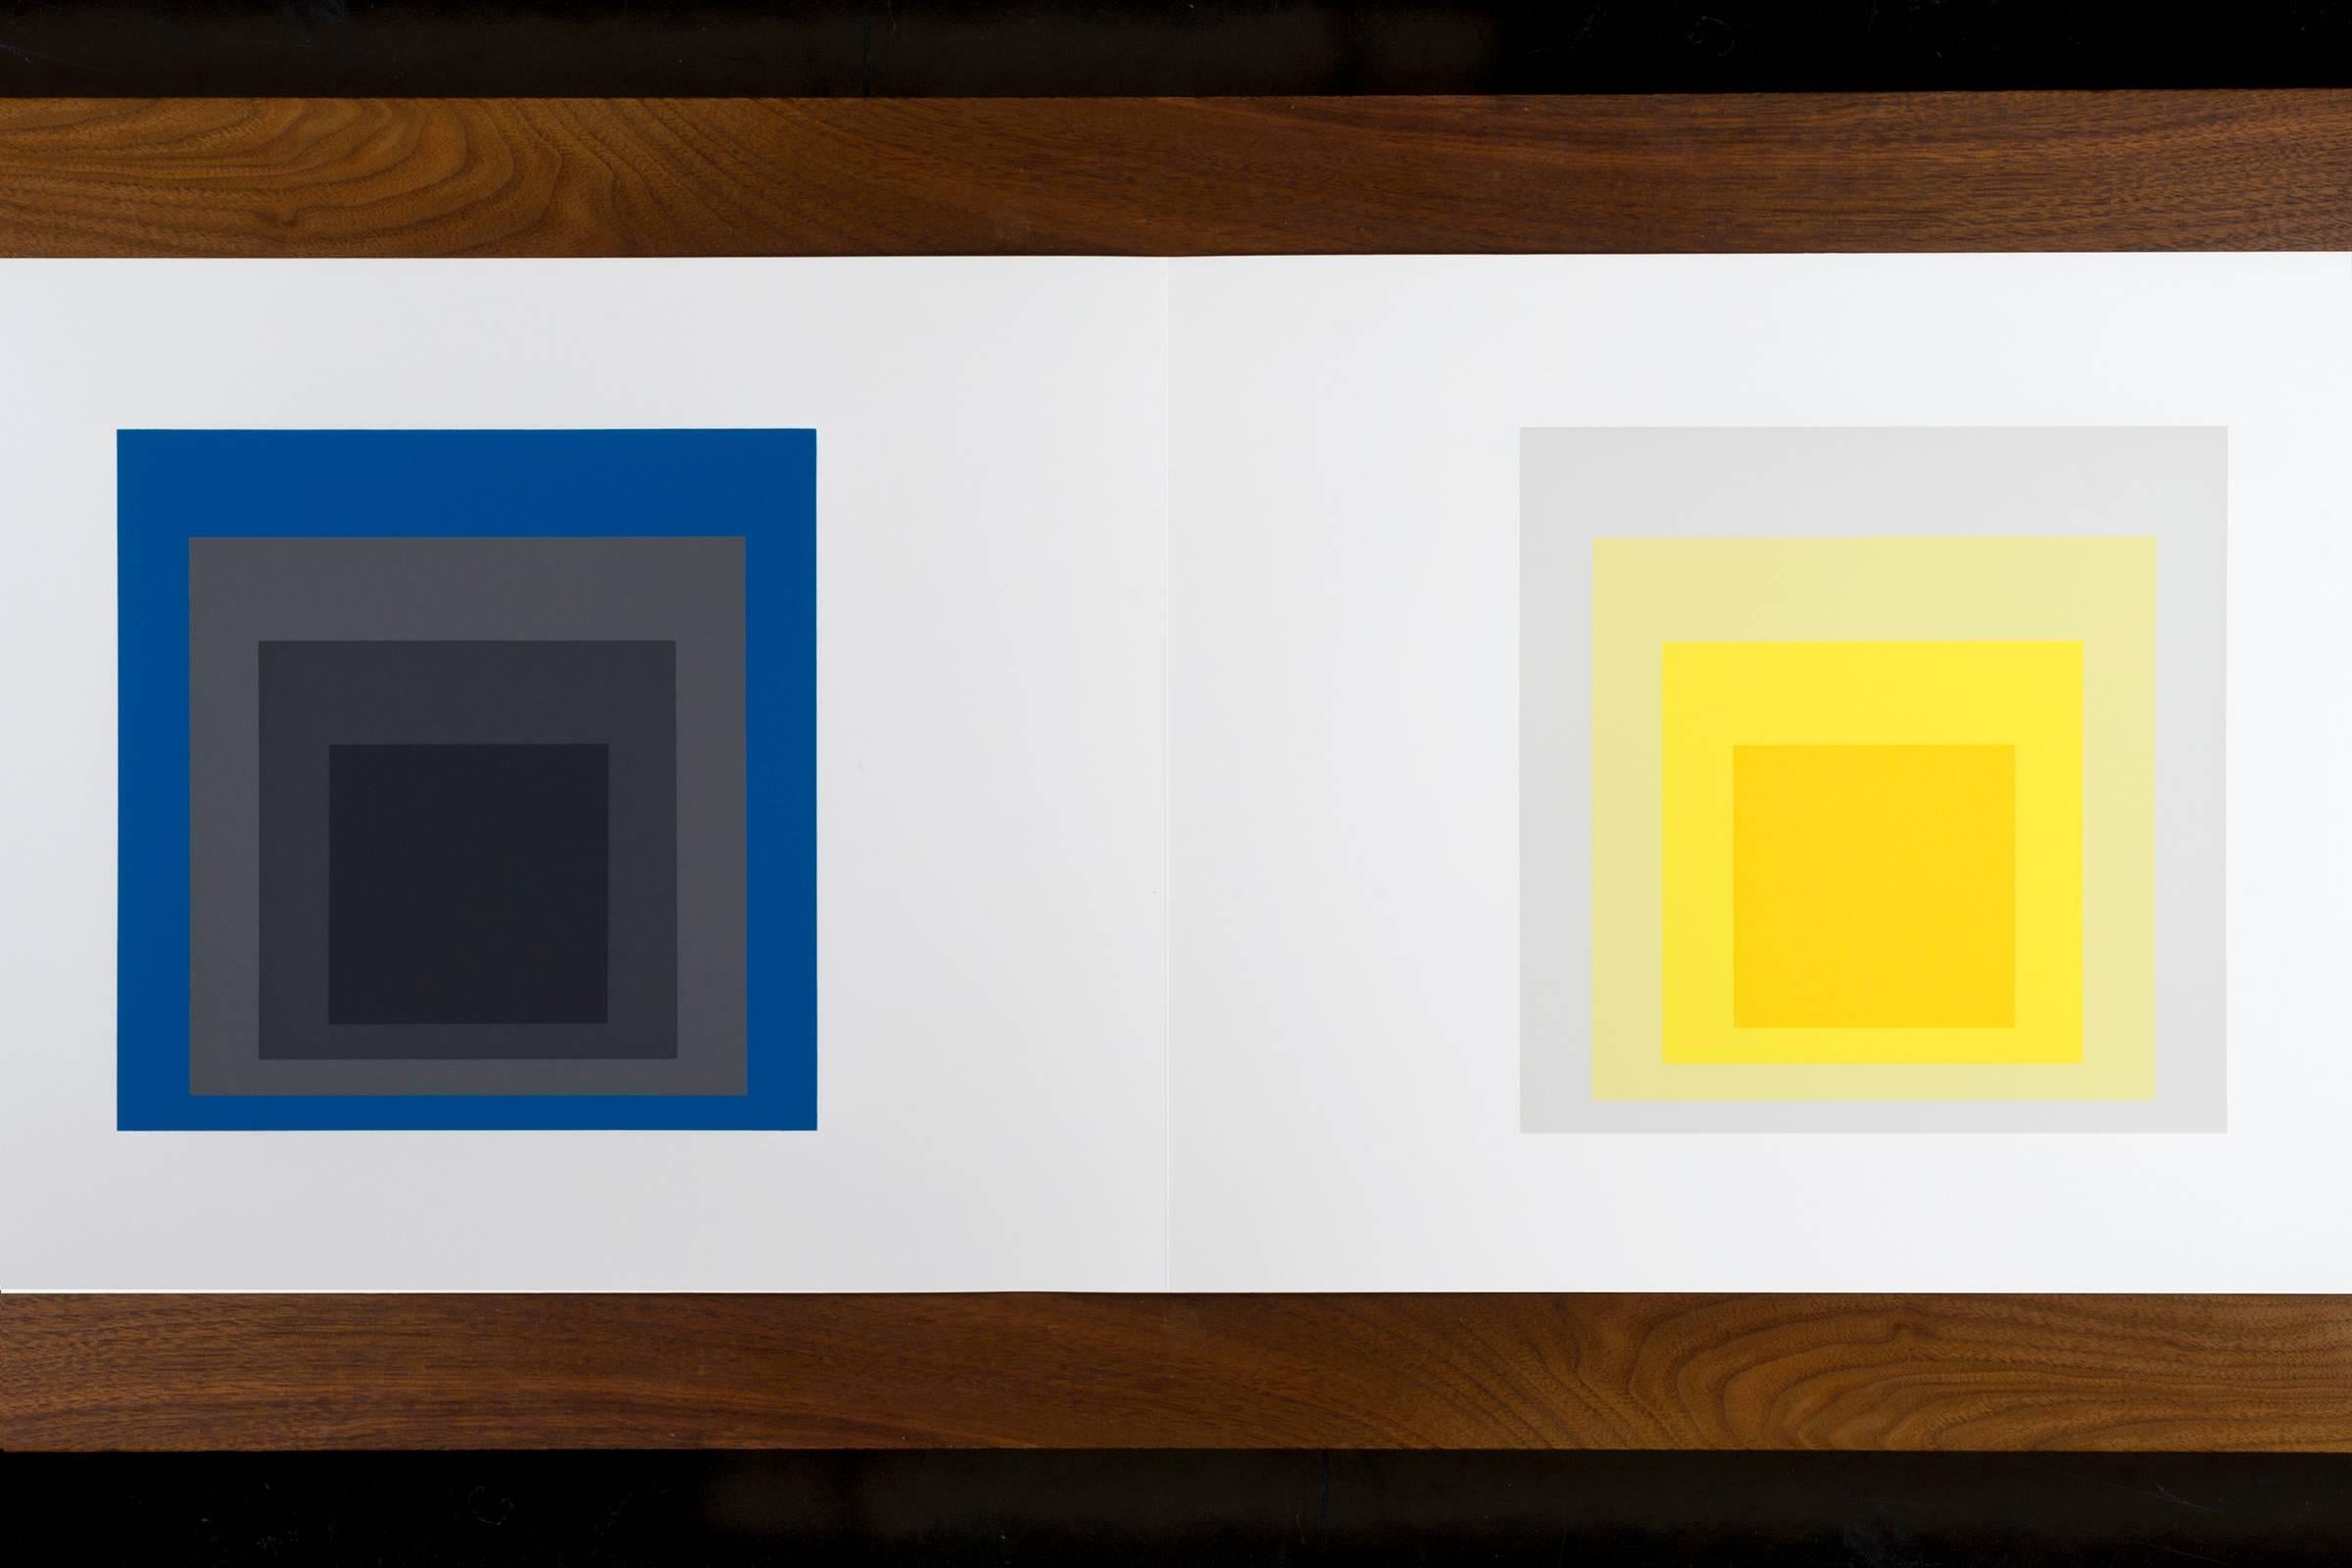 Josef Albers formulations - Articulations I & II
Edition 974/ 1000
1972 screen-print on paper
Embossed with Josef Albers initials, portfolio and folder number. This work is published by Harry N. Abrams and Ives-Sillman.
This work has never been